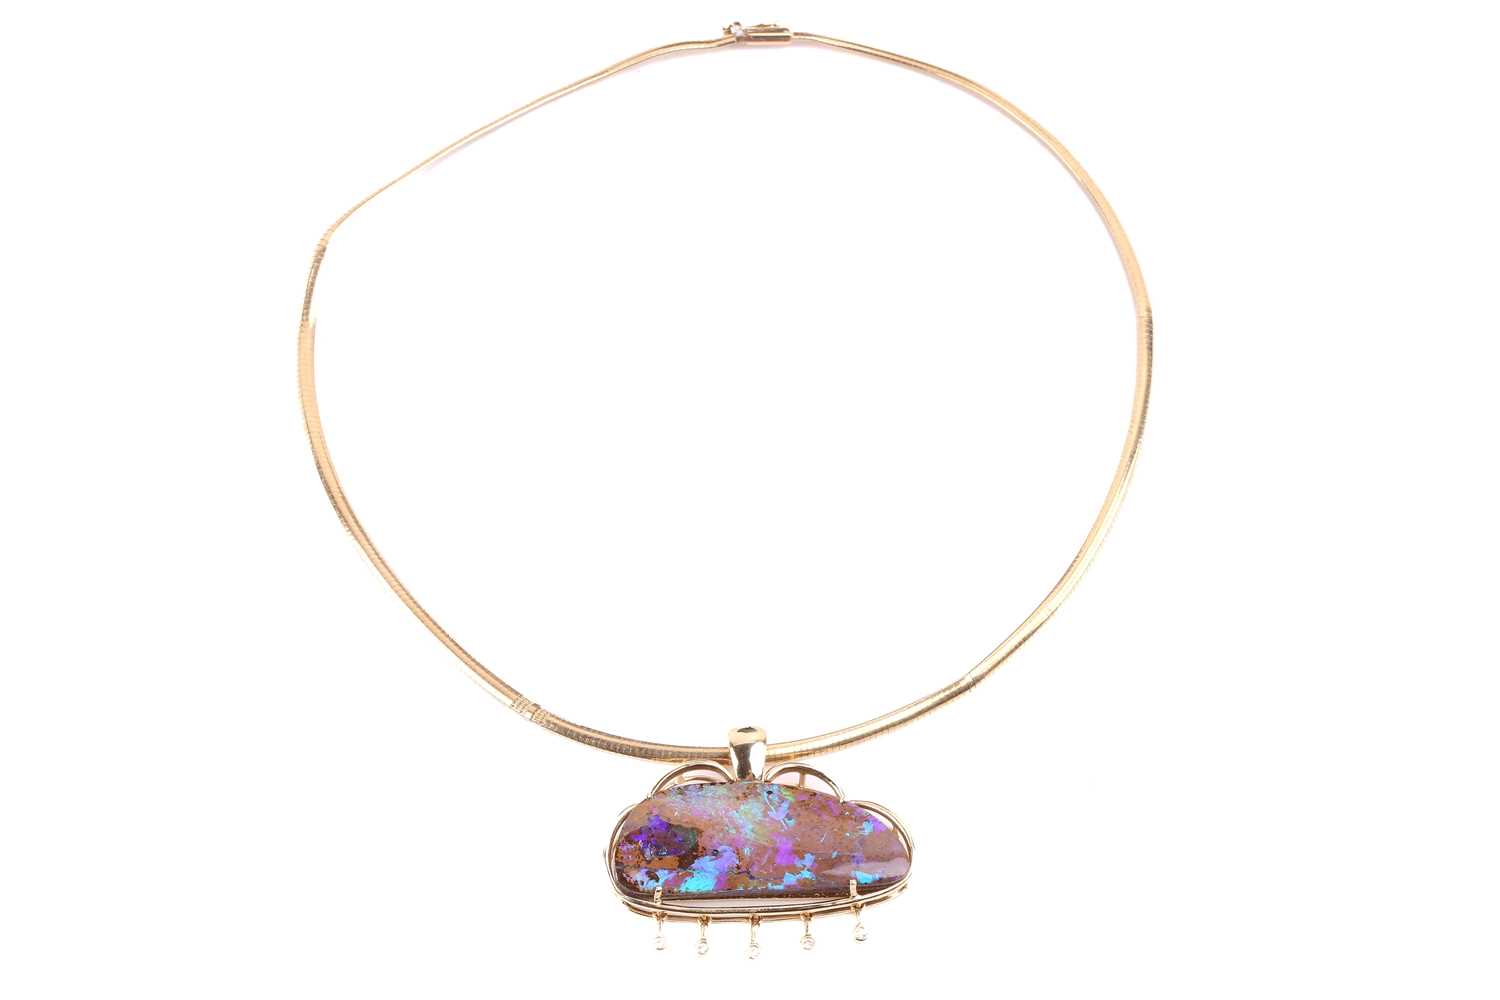 An opal and diamond pendant necklace, the pendant is designed as a cloud set with a boulder opal